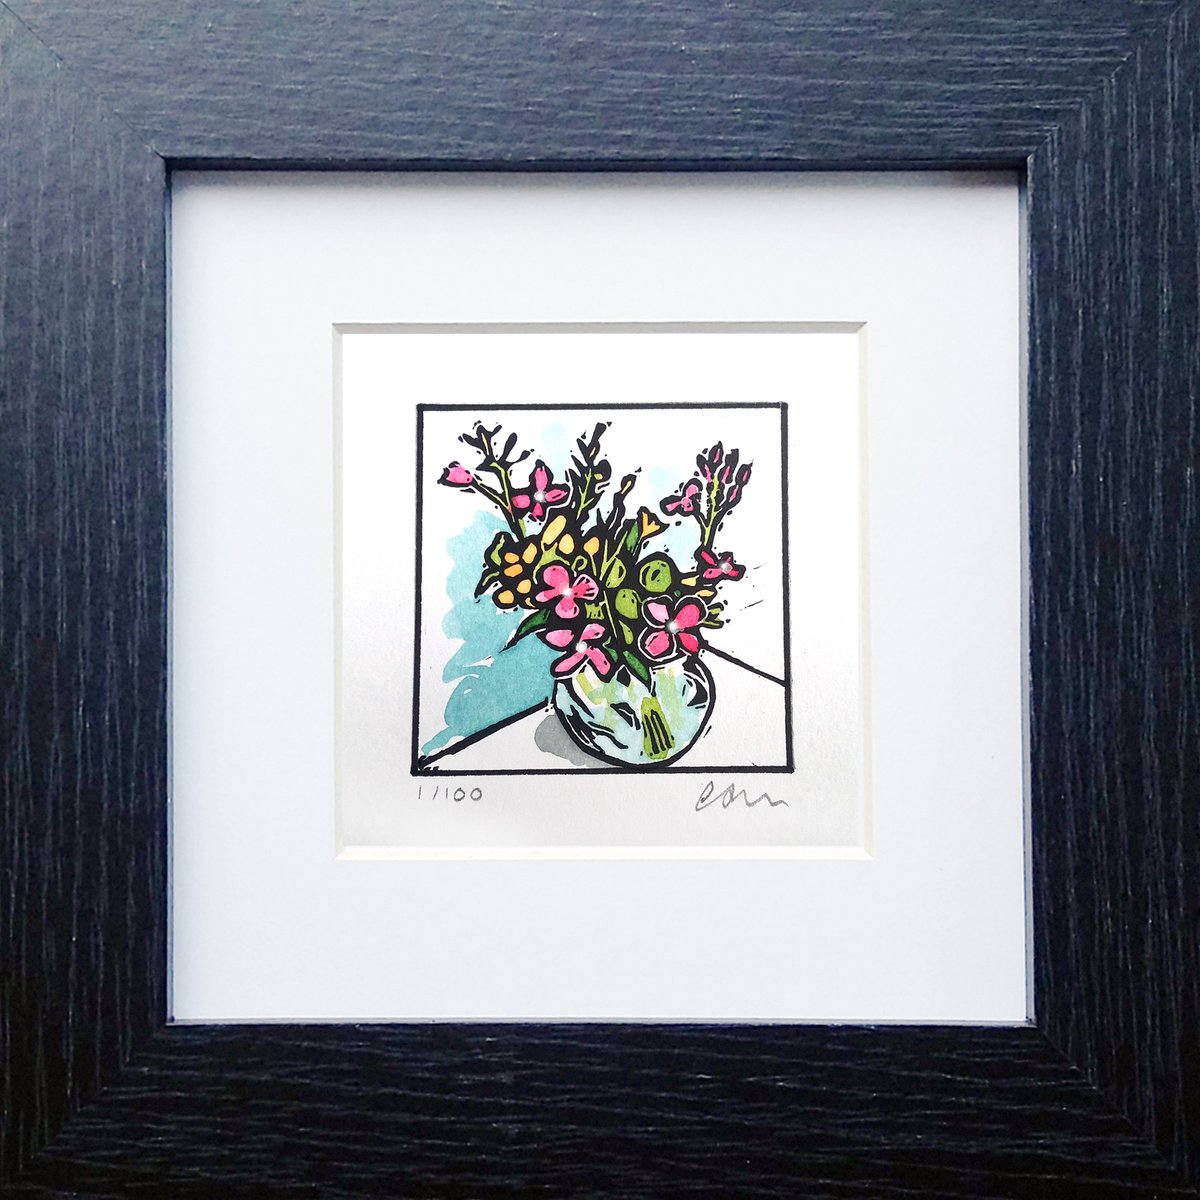 Glass bowl of flowers - Framed and ready to hang - miniature variable edition linocut prin... by Carolynne Coulson